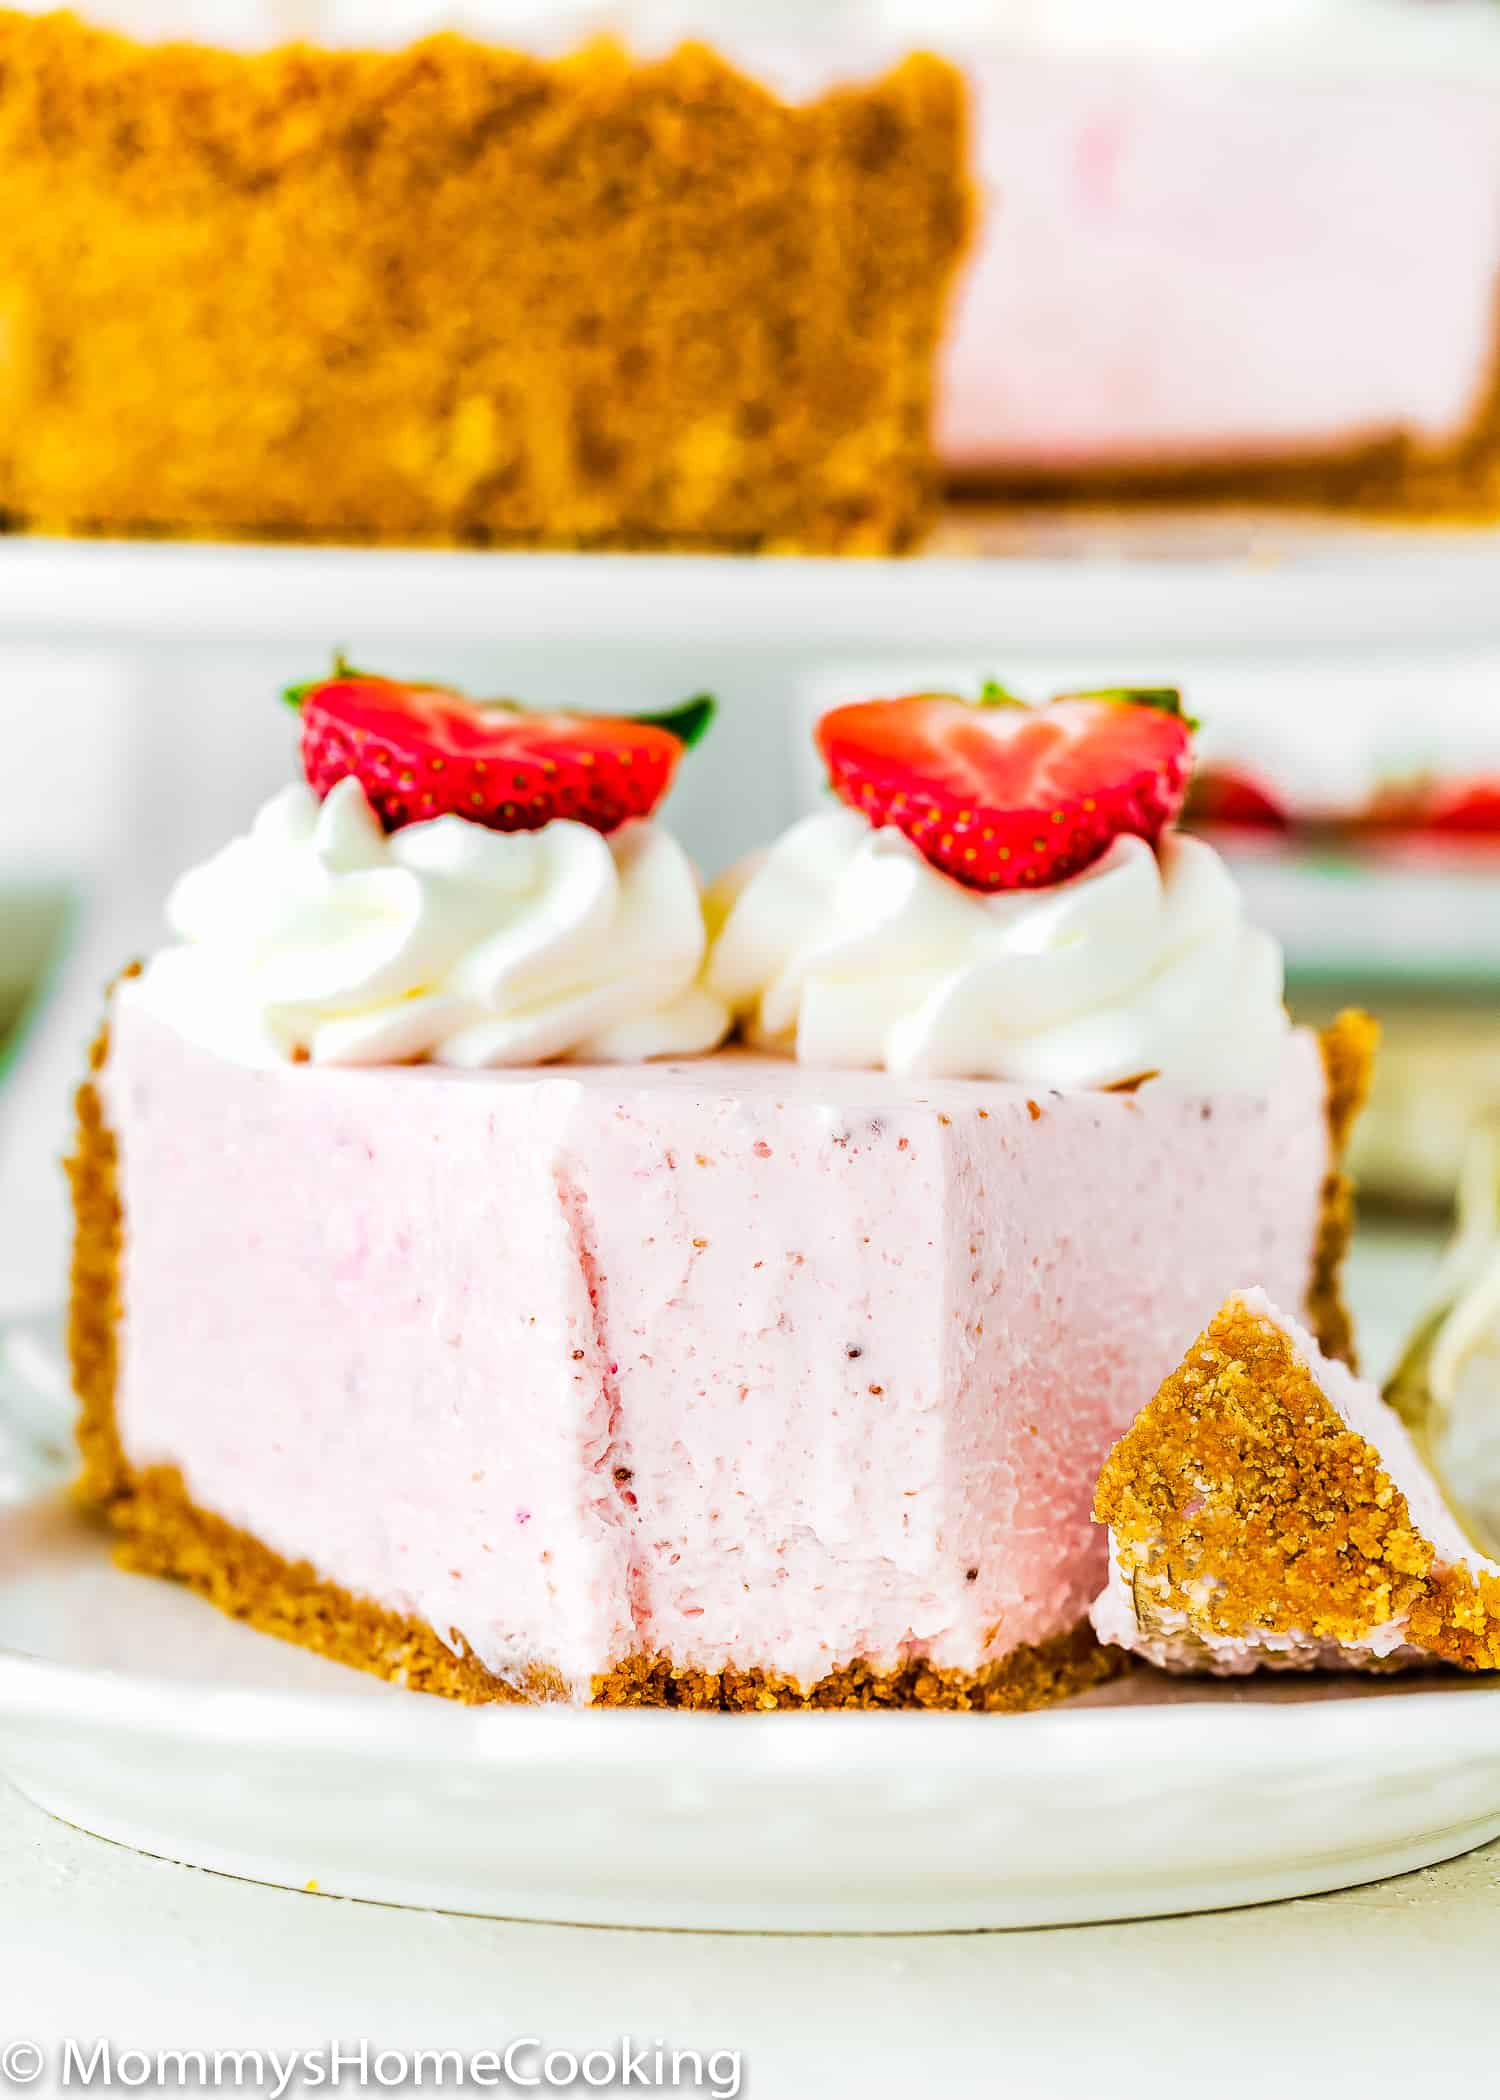 a slice of No-Bake Strawberry Cheesecake showing its creamy texture.